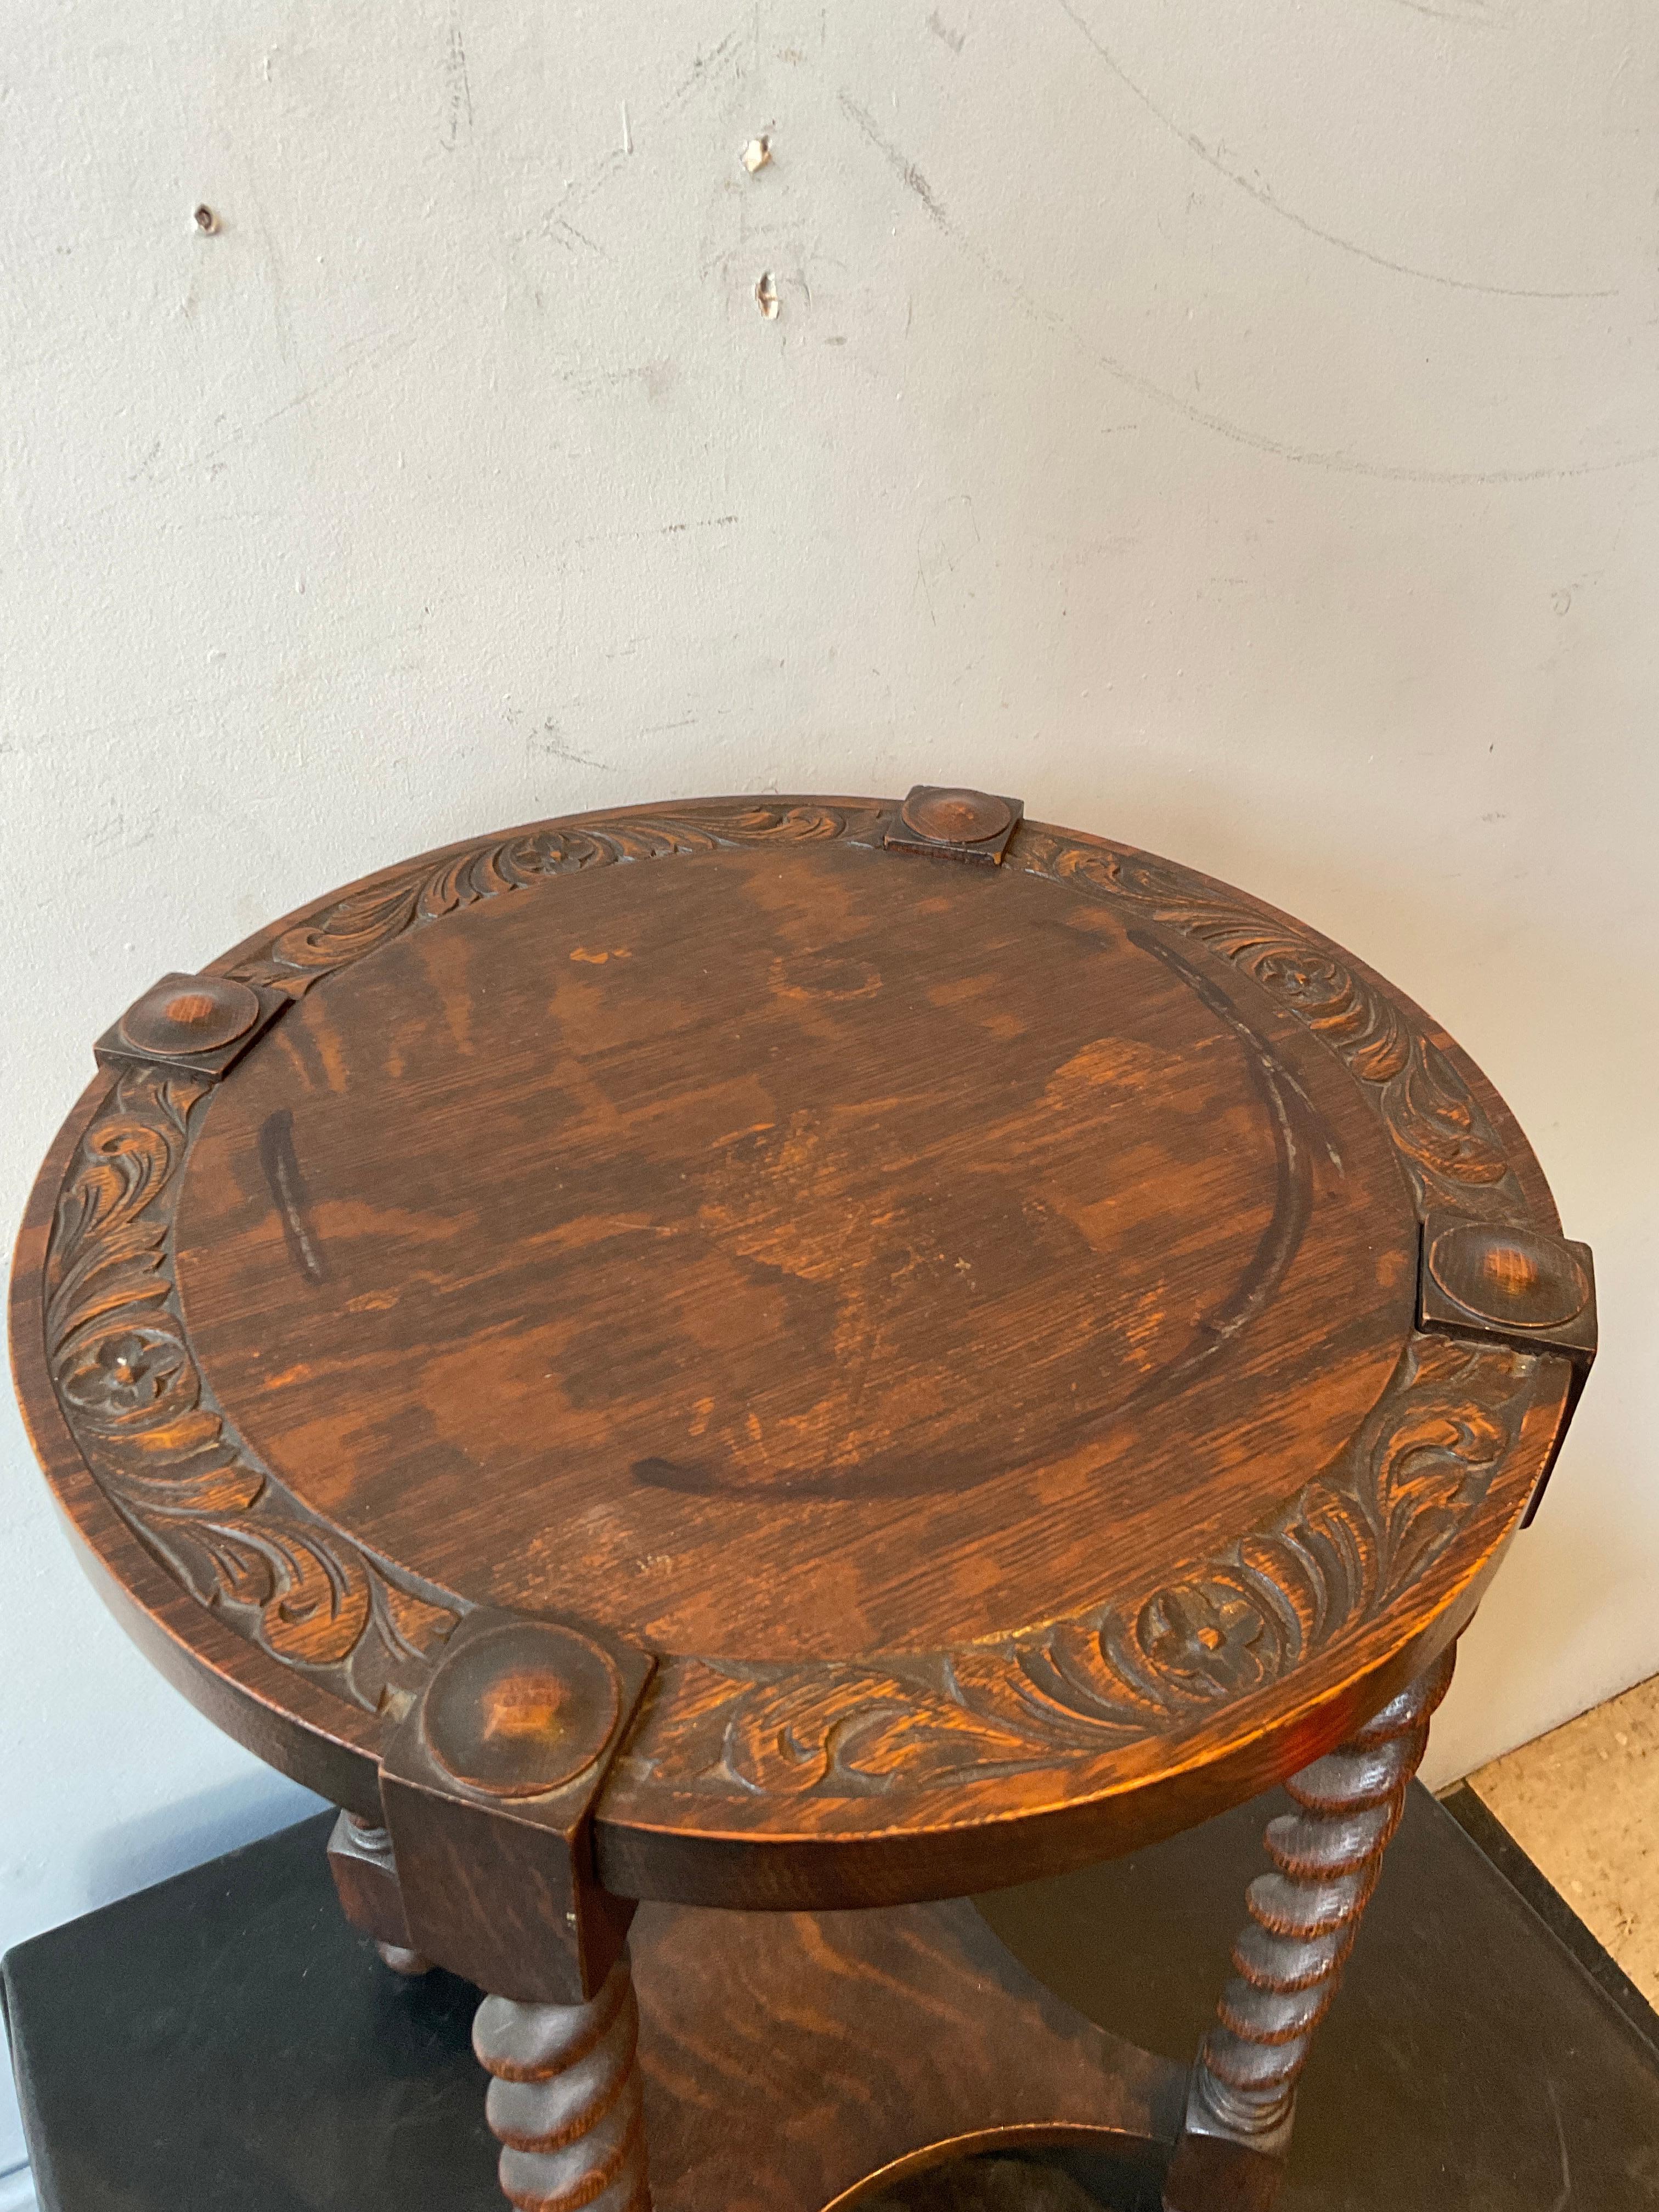 Circa 1900 English Barley Twist side table. Marks on top of table as shown in picture.